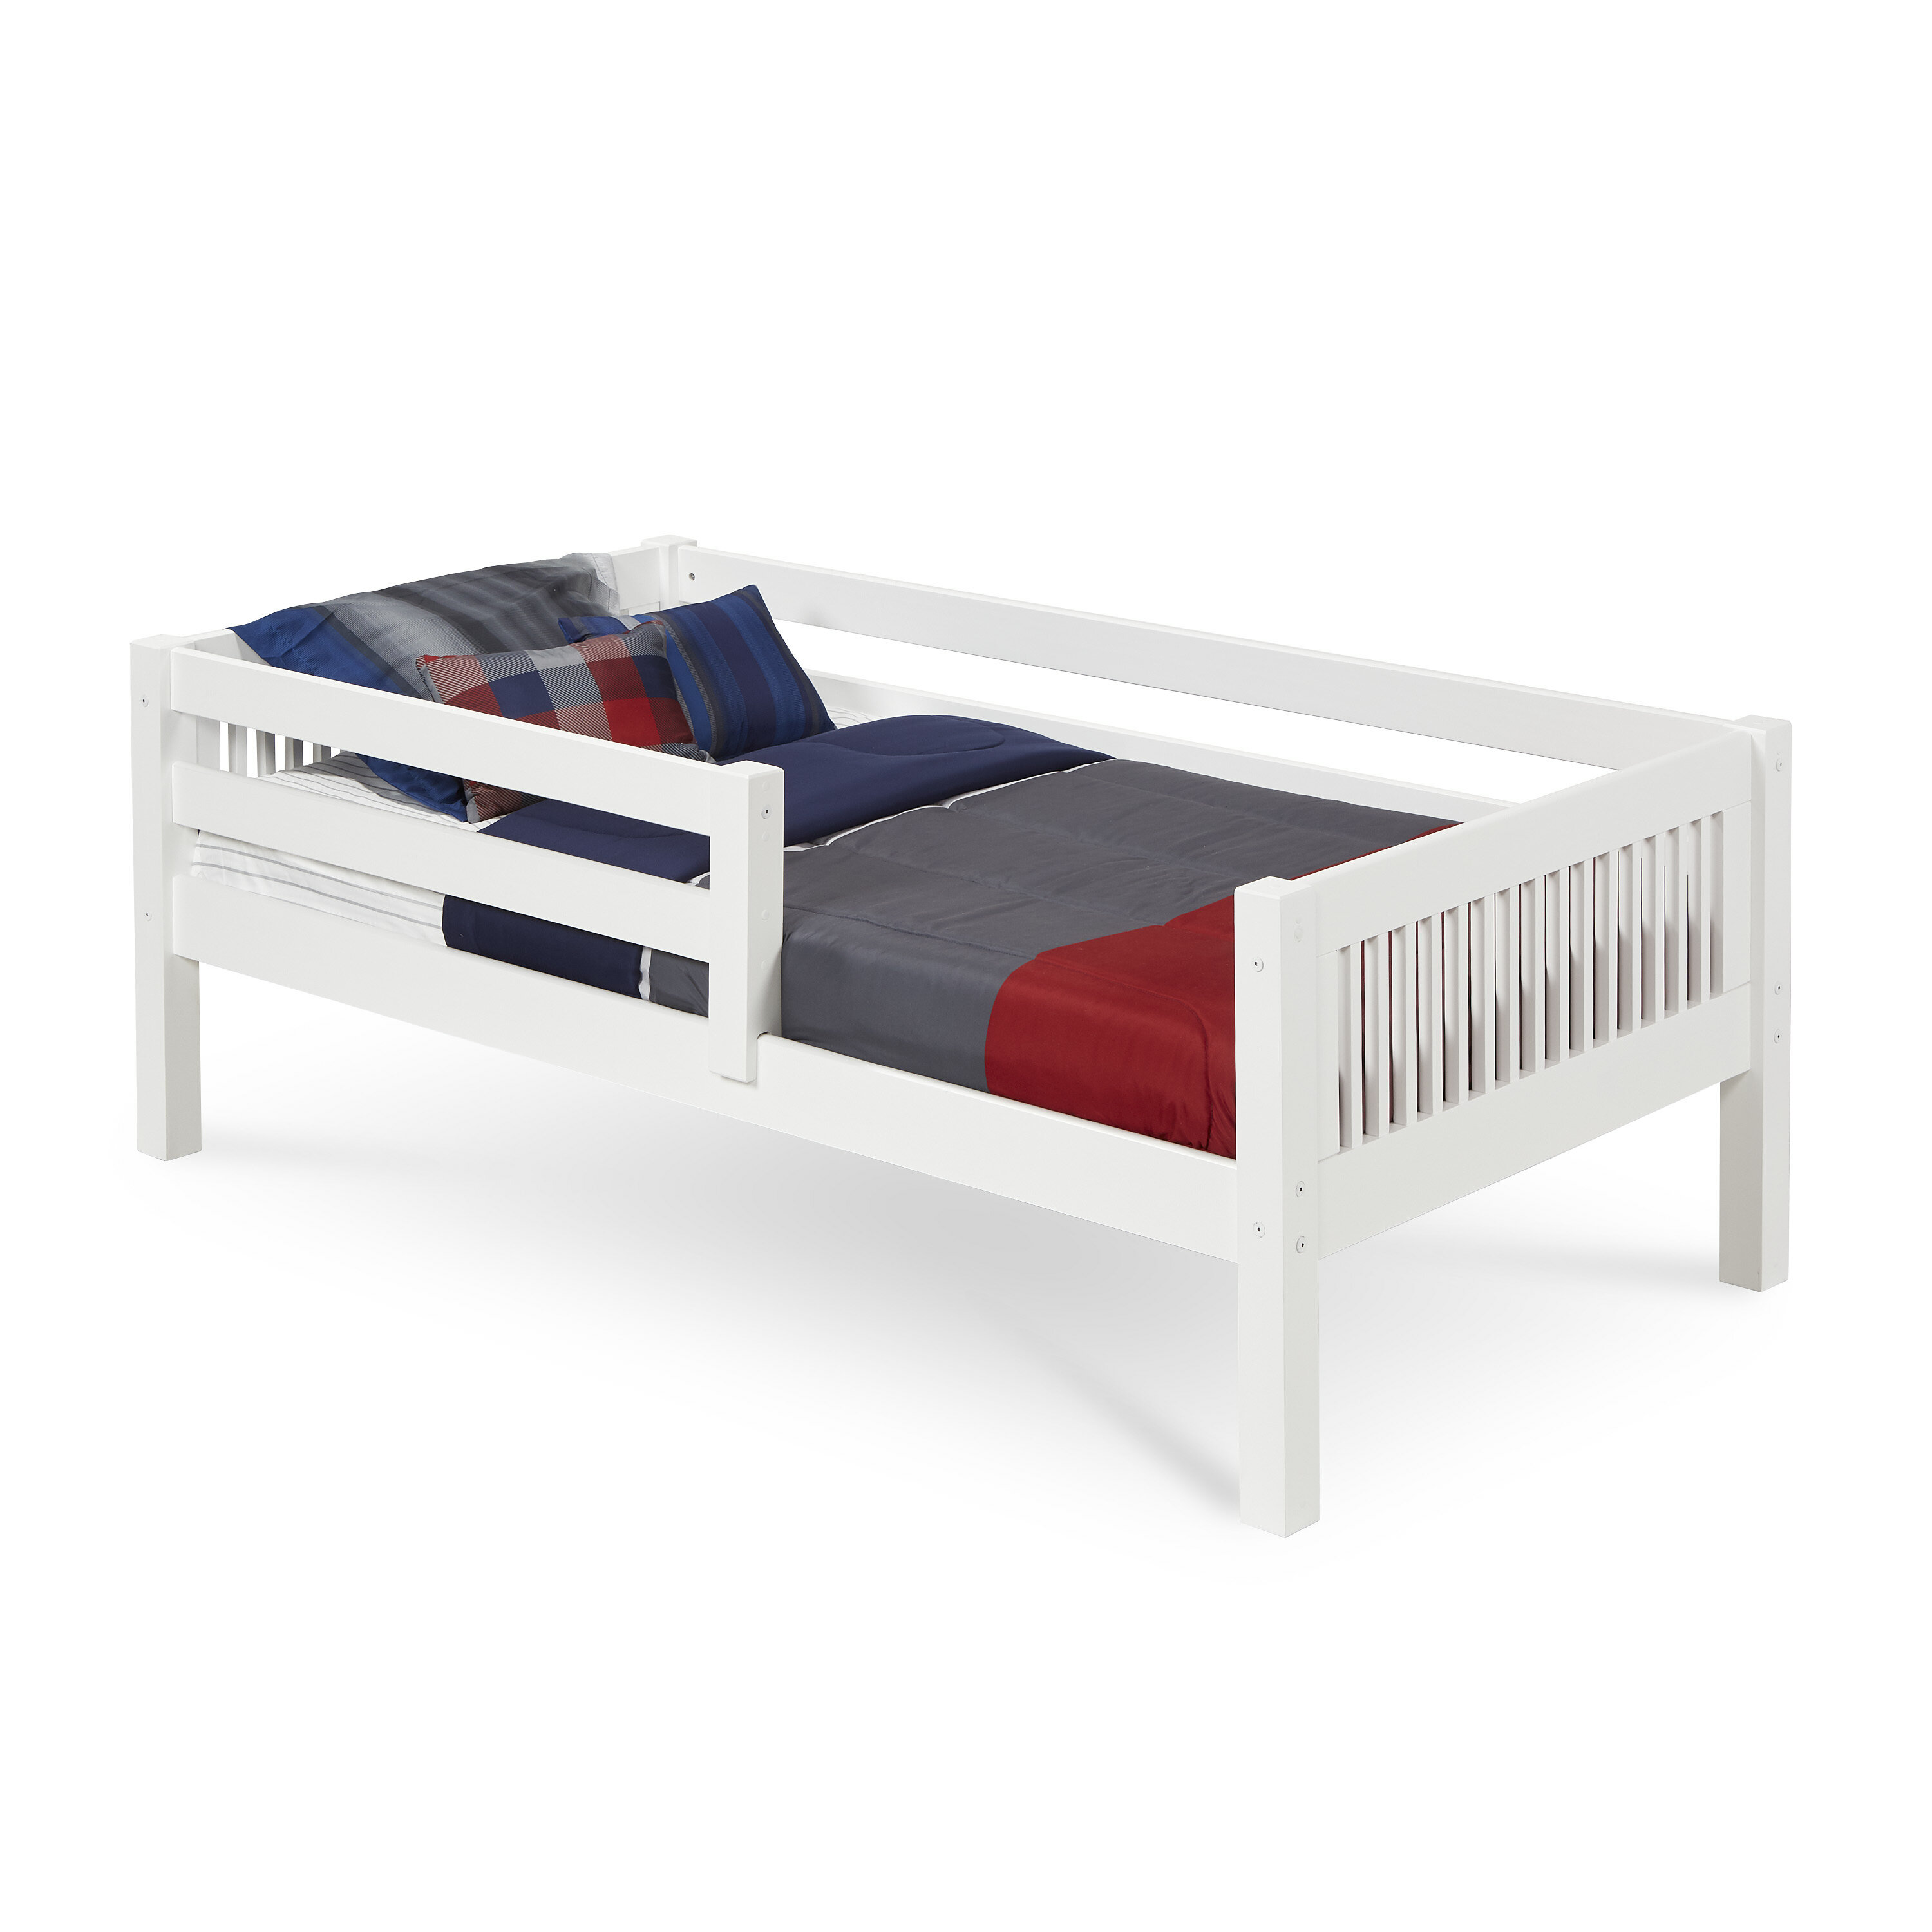 twin size girls bed